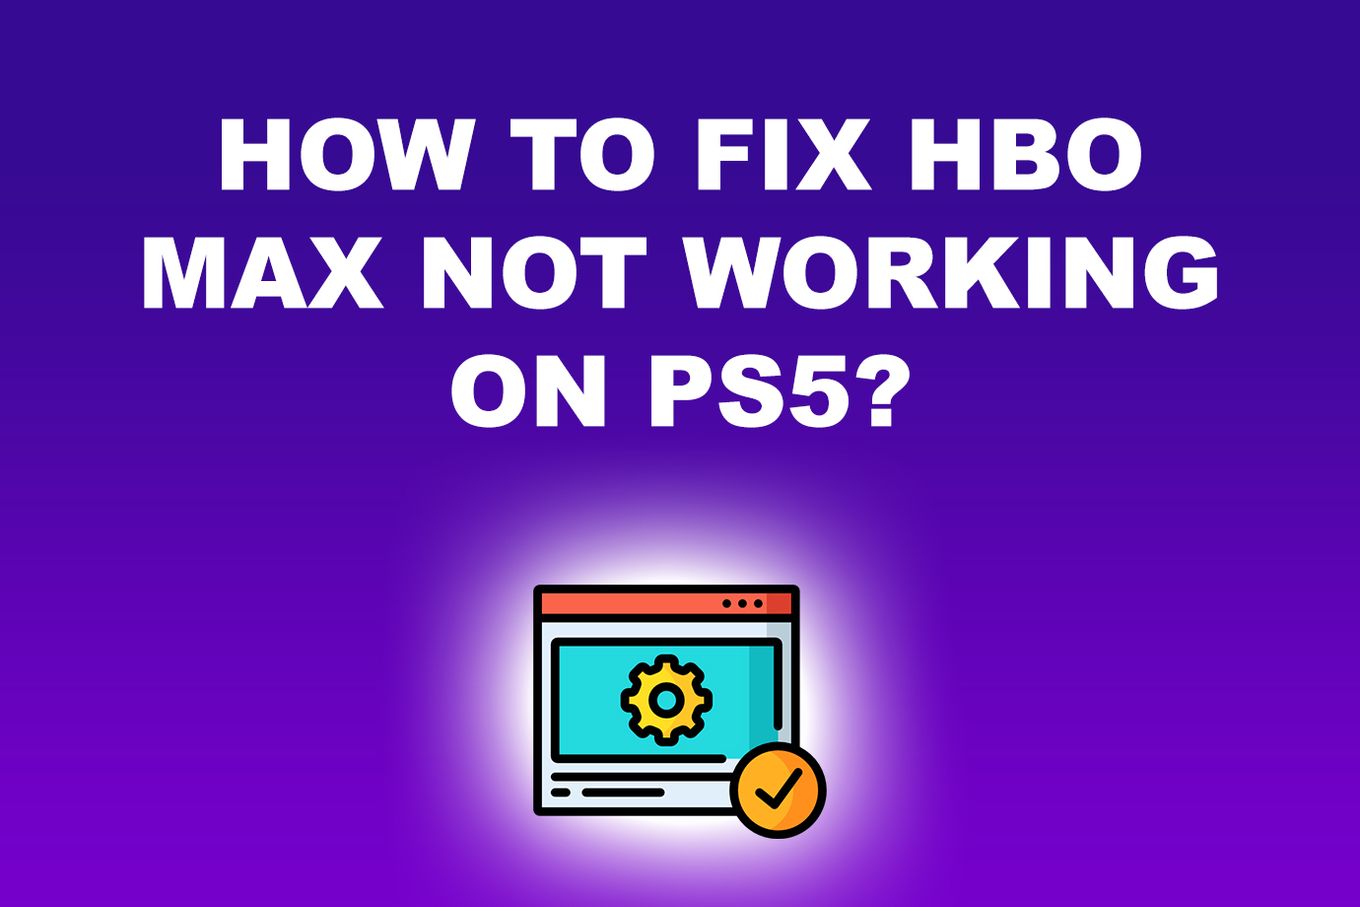 How To Fix HBO Not Working On PS5